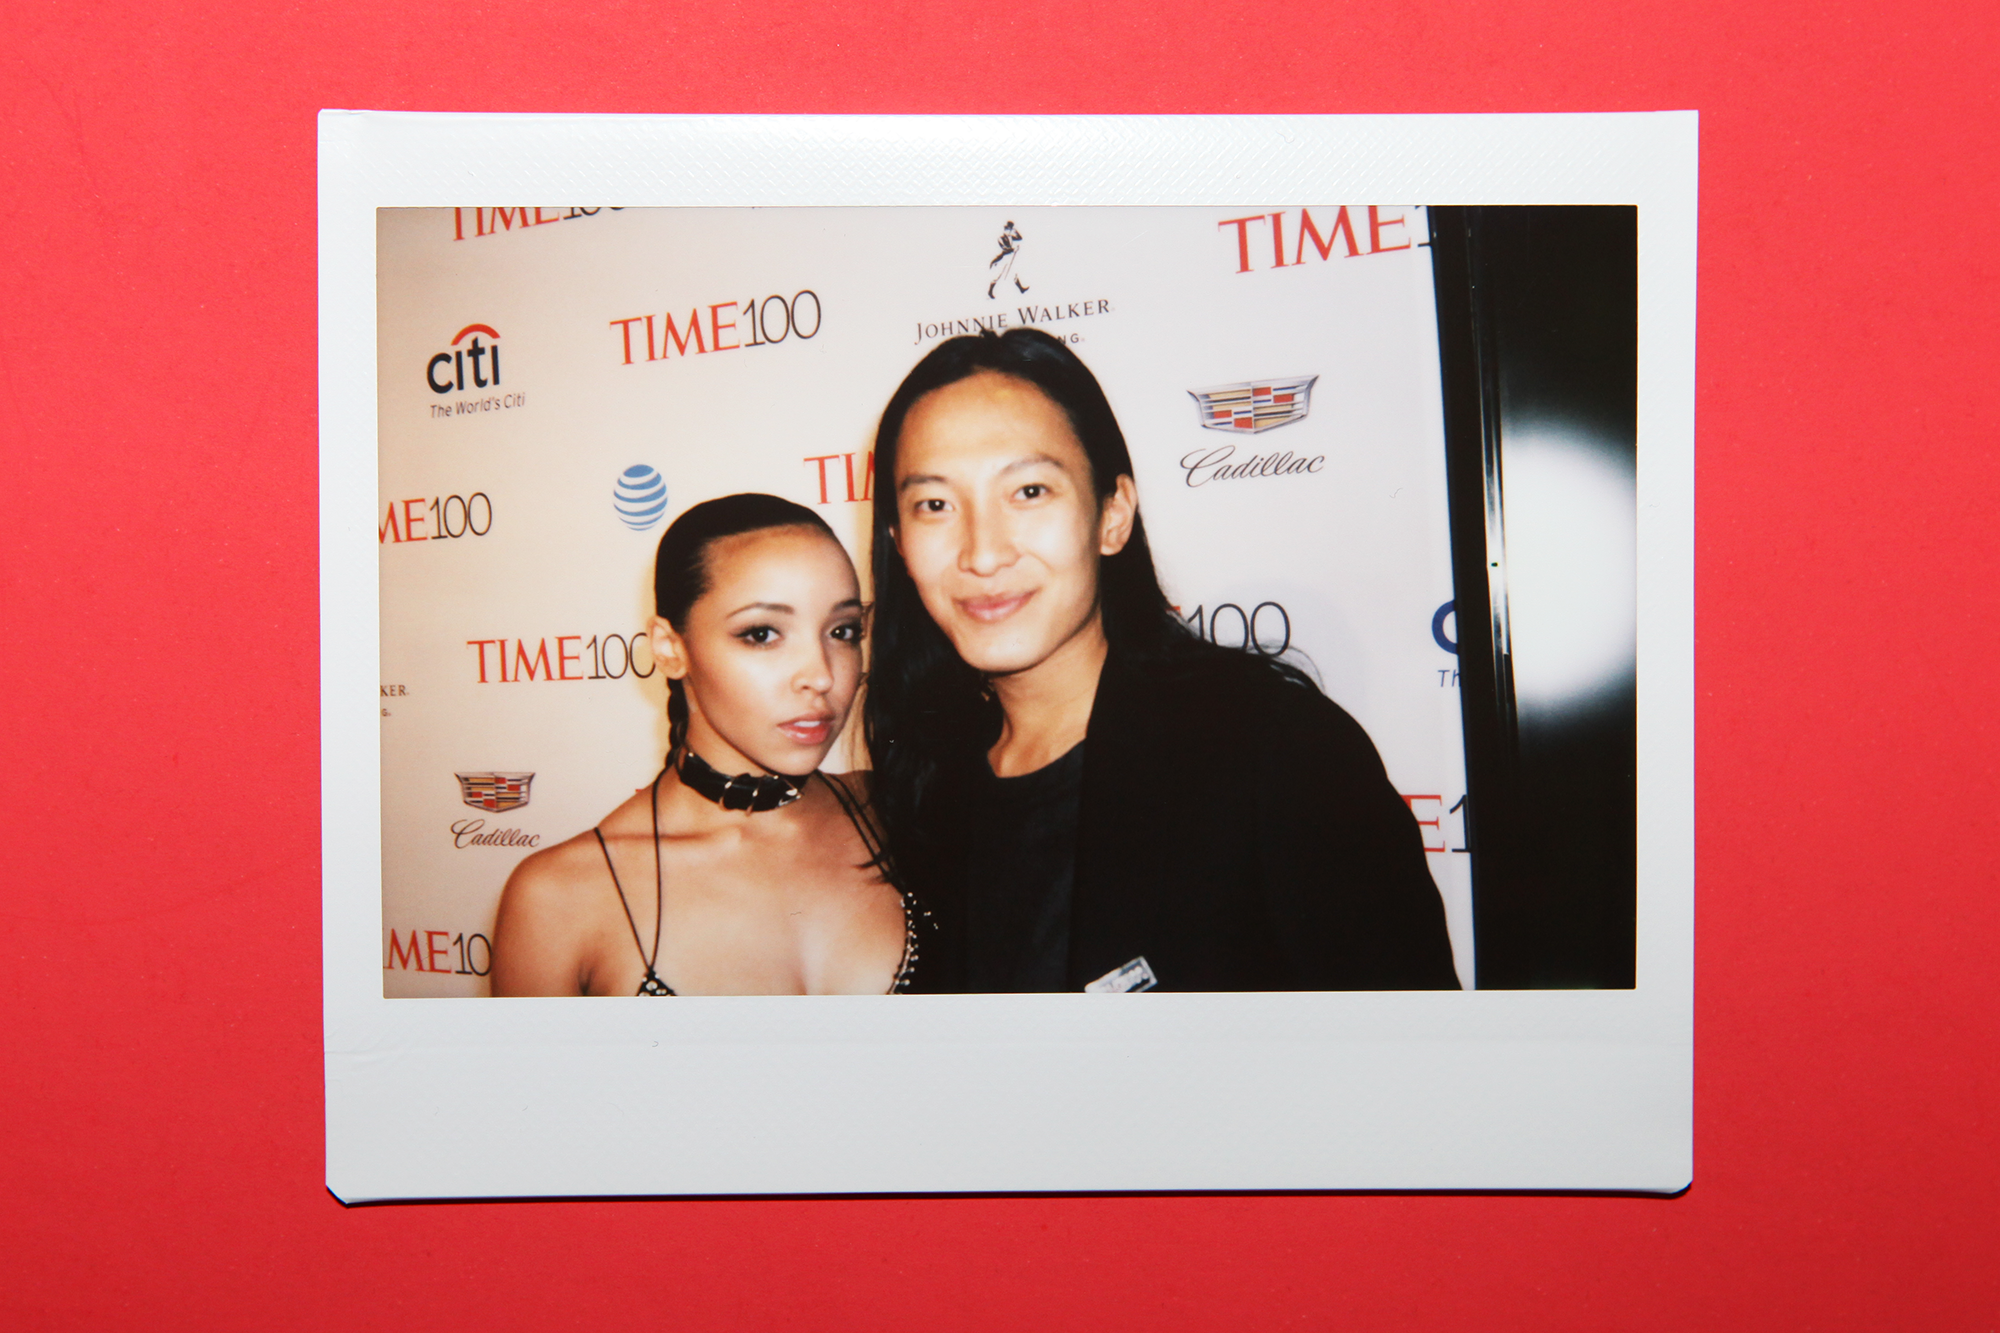 Tinashe and Alexander Wang arrive at the TIME 100 Gala at the Time Warner Center on April 26, 2016 in New York City.